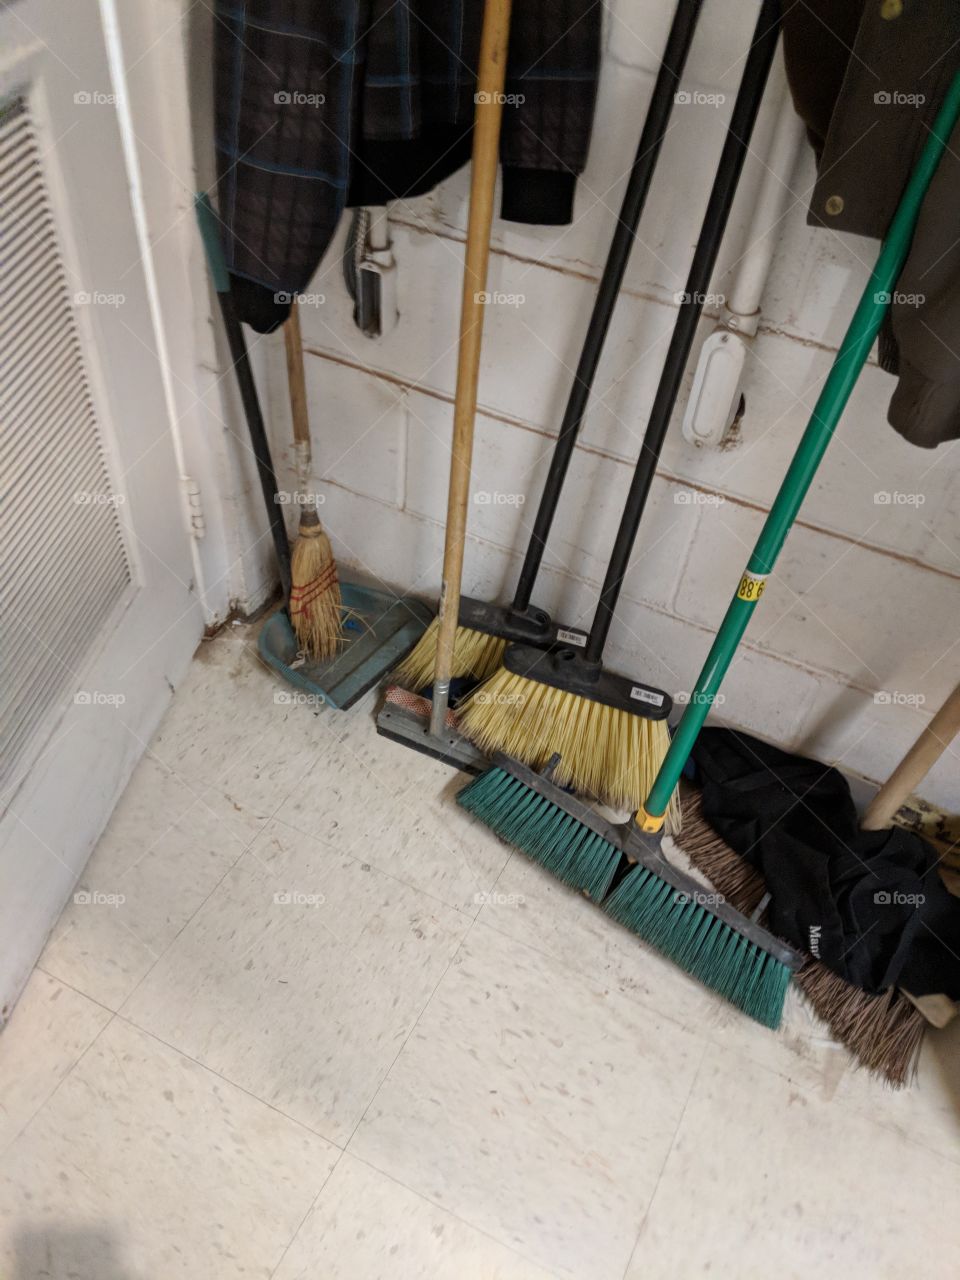 worthless work equipment - filth, dust, and grime at your service!